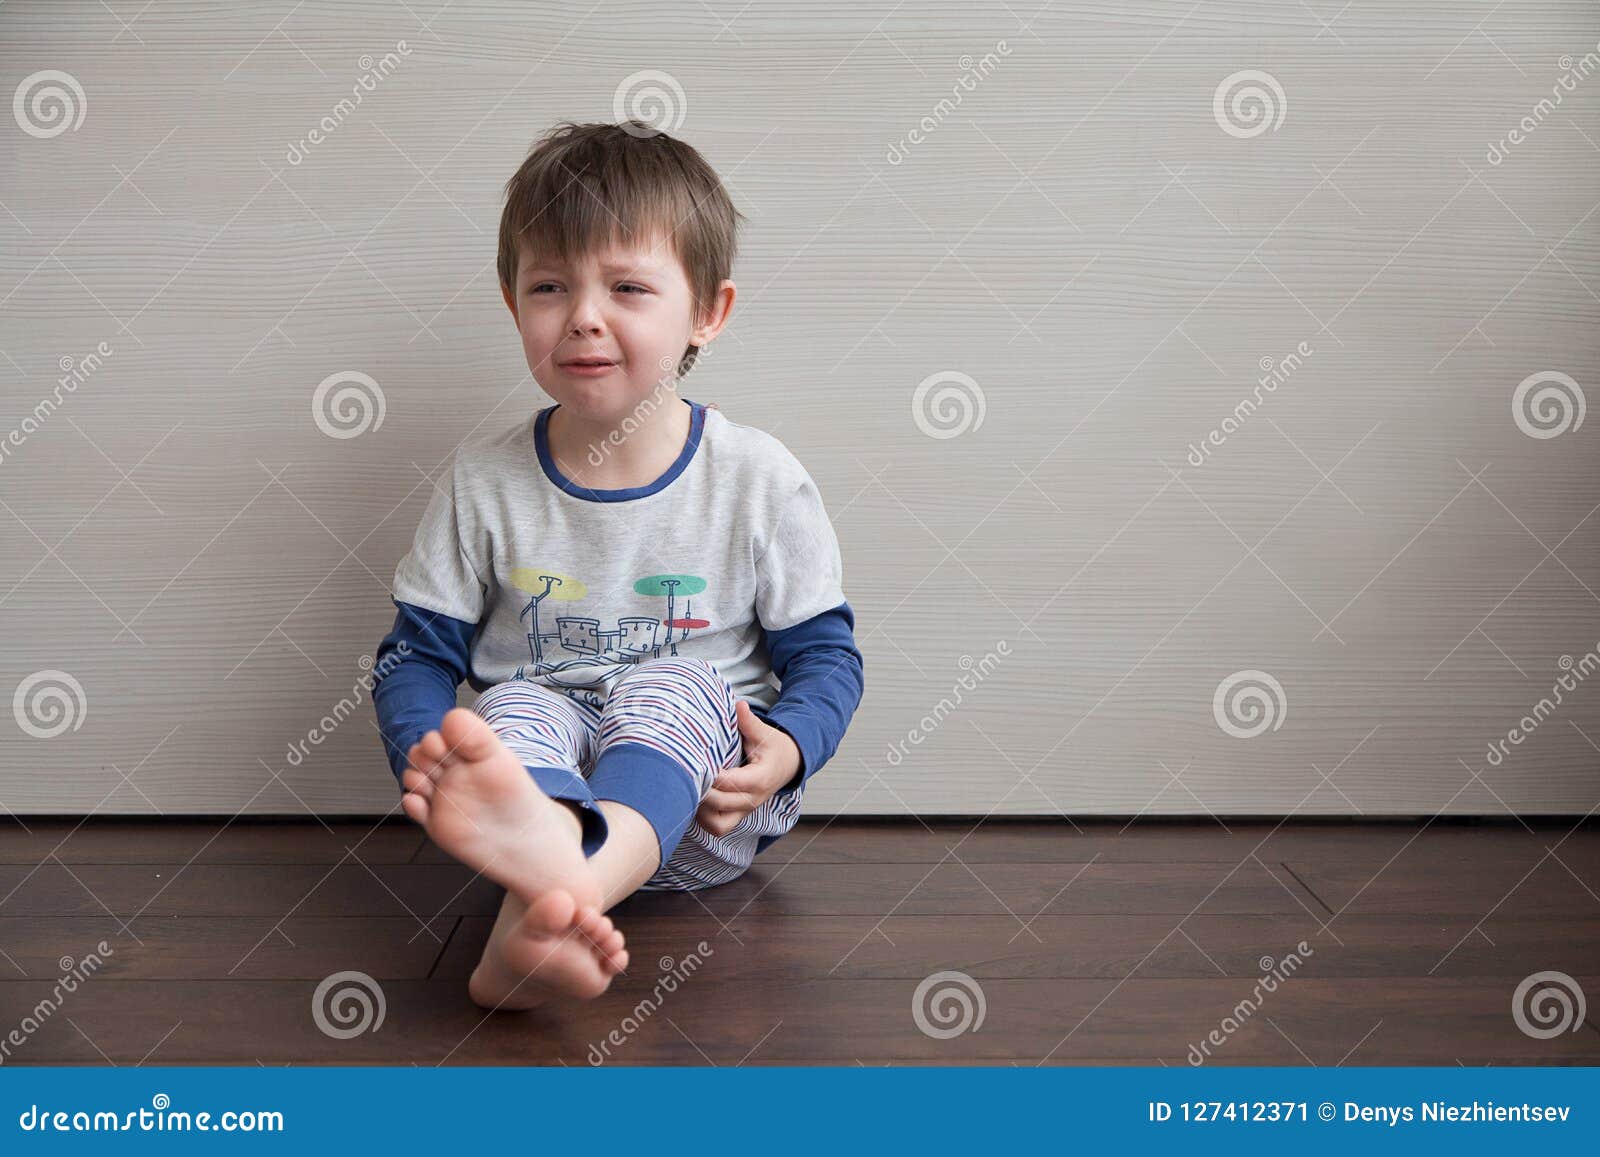 The Boy Is Crying. The Child Is Sitting On The Floor. Stock Image Image of childhood, toddler